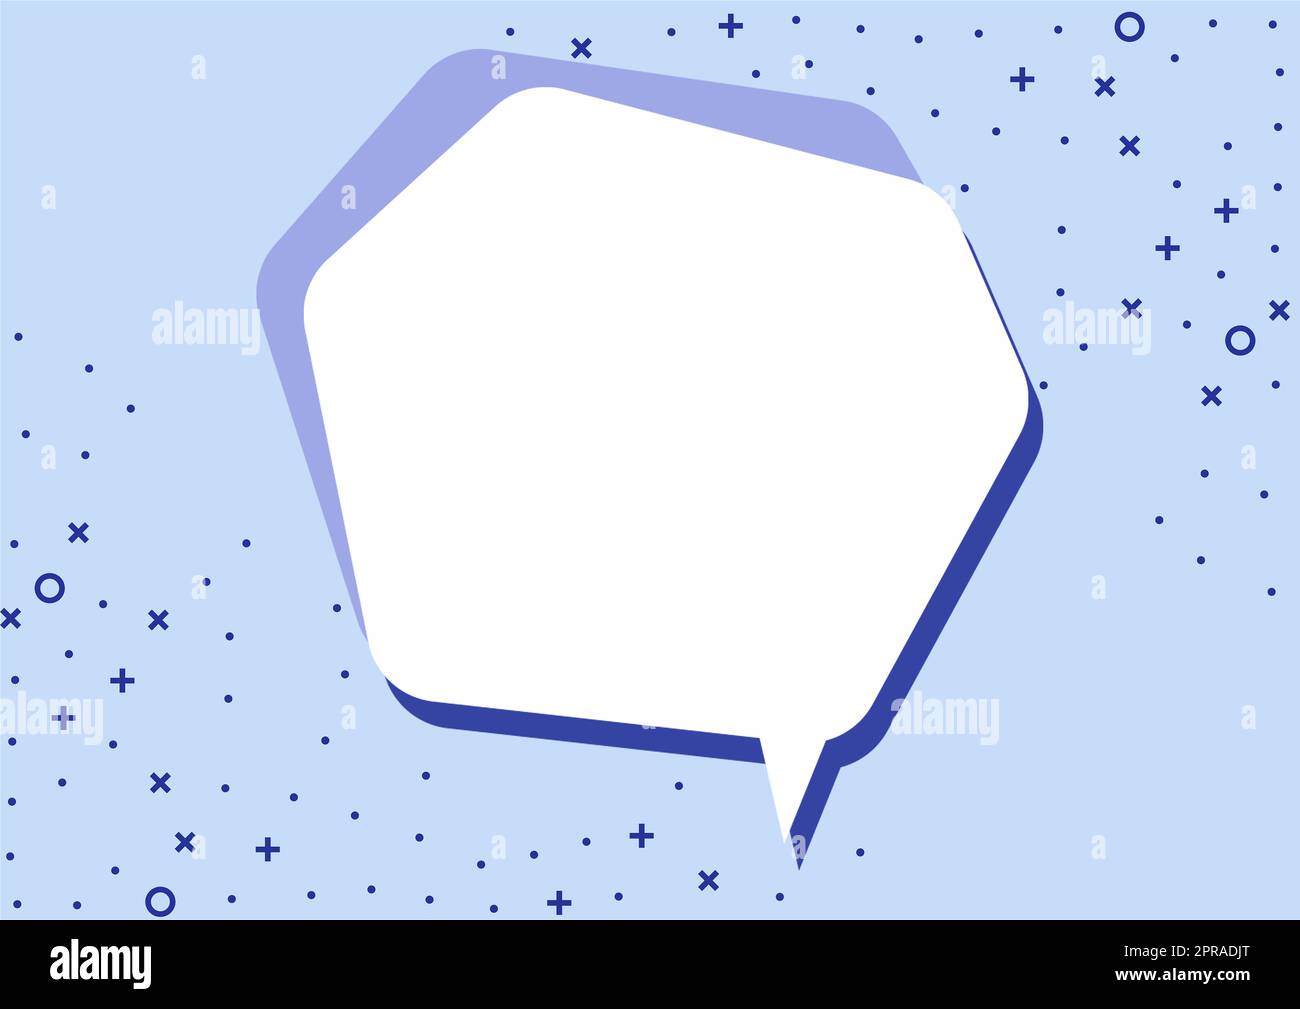 Blank Speech Bubble With Copy Space For Business Branding And Designs Over Color Background. Empty Chat Displaying Web Banners For Advertising And Promoting Company. Stock Photo